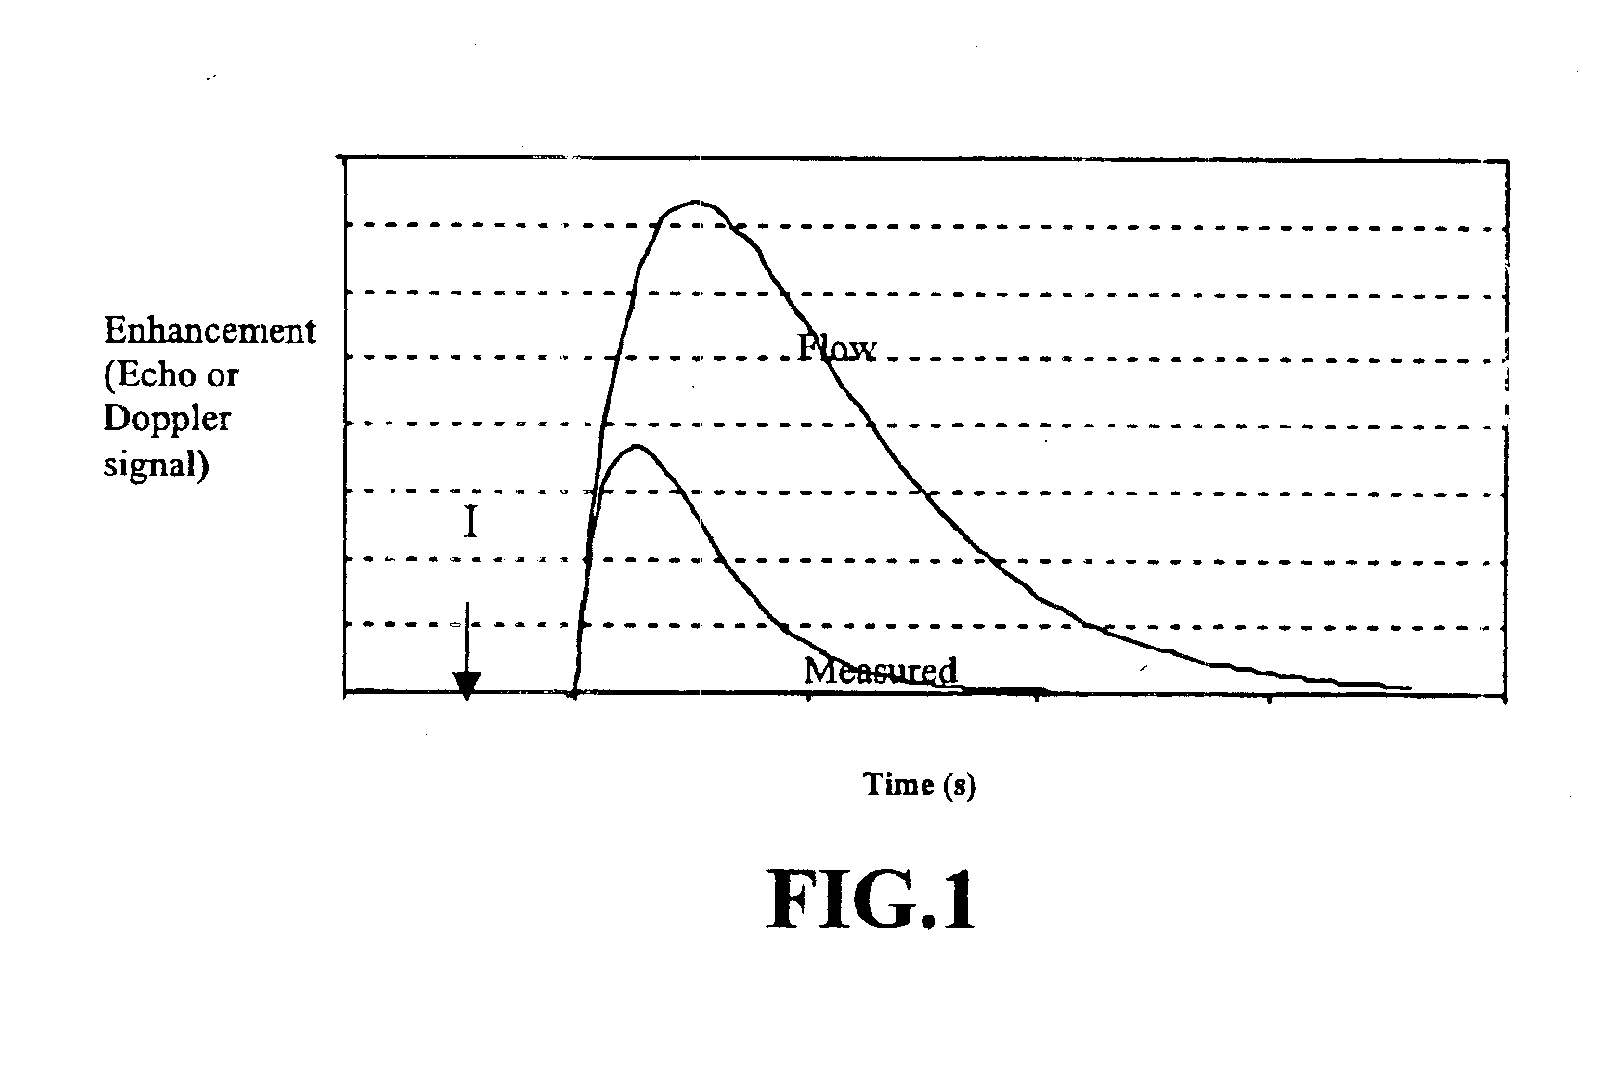 Method and apparatus to control microbubble destruction during contrast-enhanced ultrasound imaging, and uses therefor